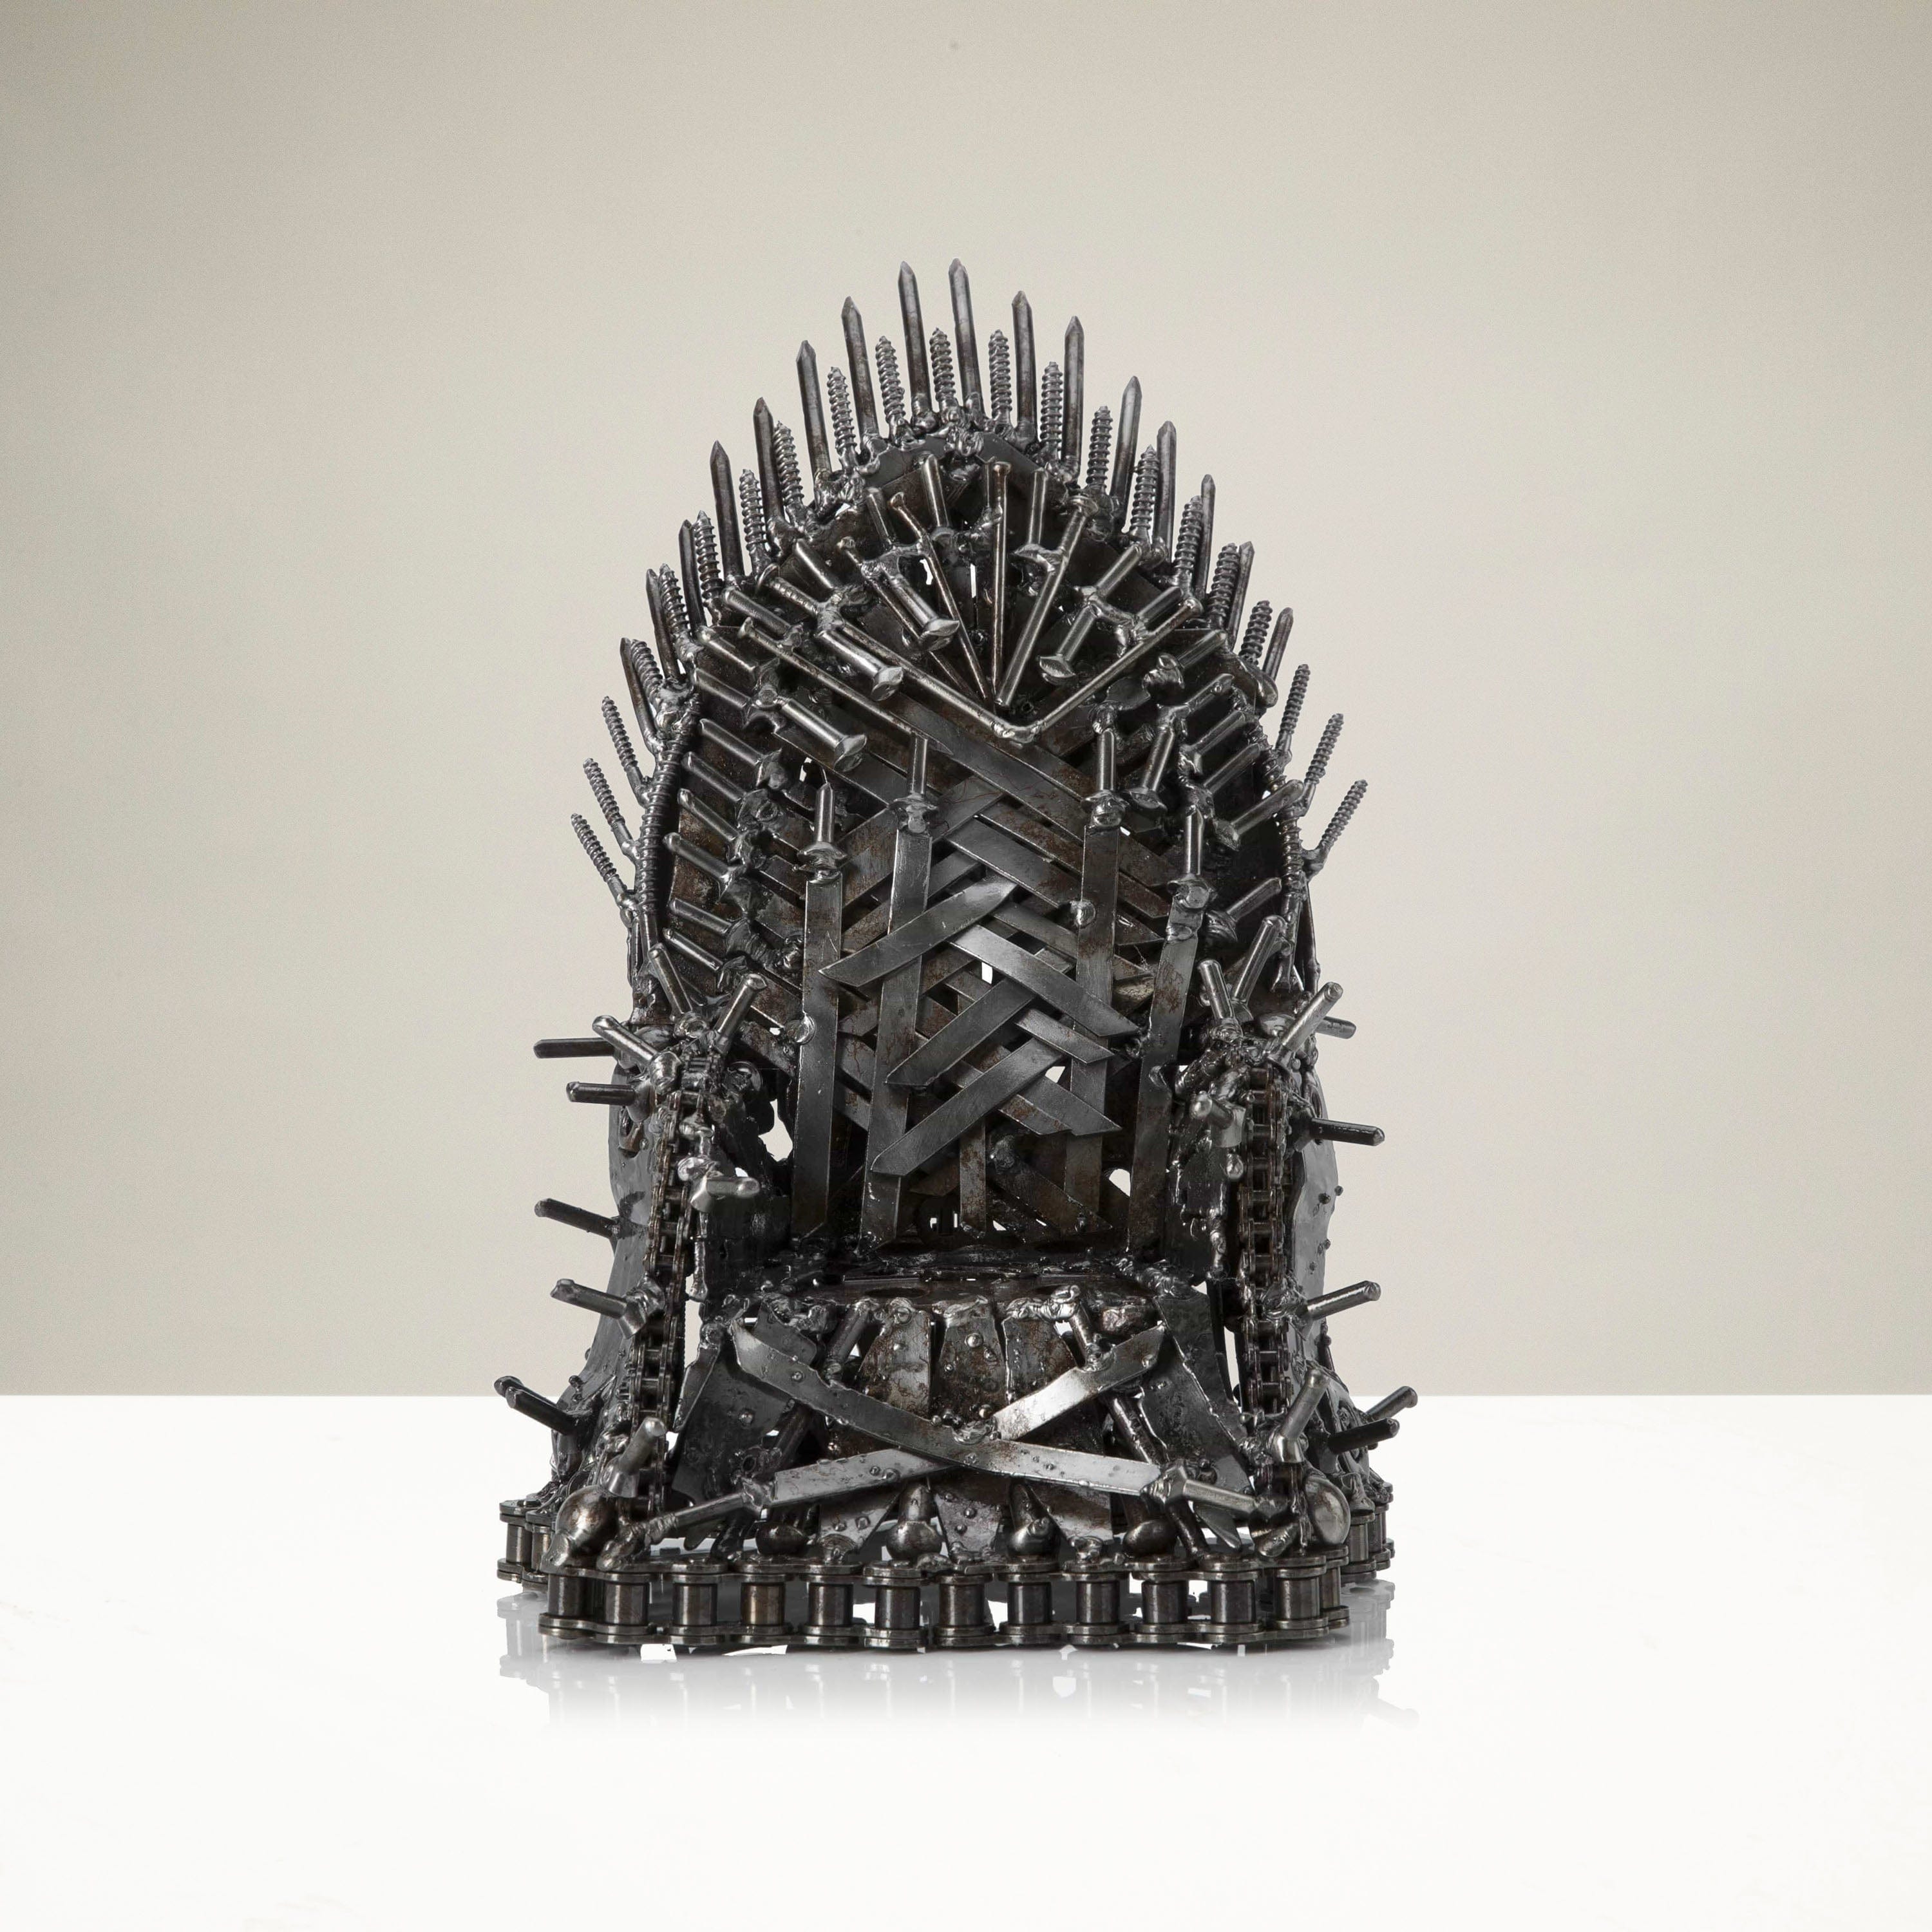 Kalifano Recycled Metal Art Game of Thrones, Throne Inspired Recycled Metal Sculpture RMS-TH28x20-N